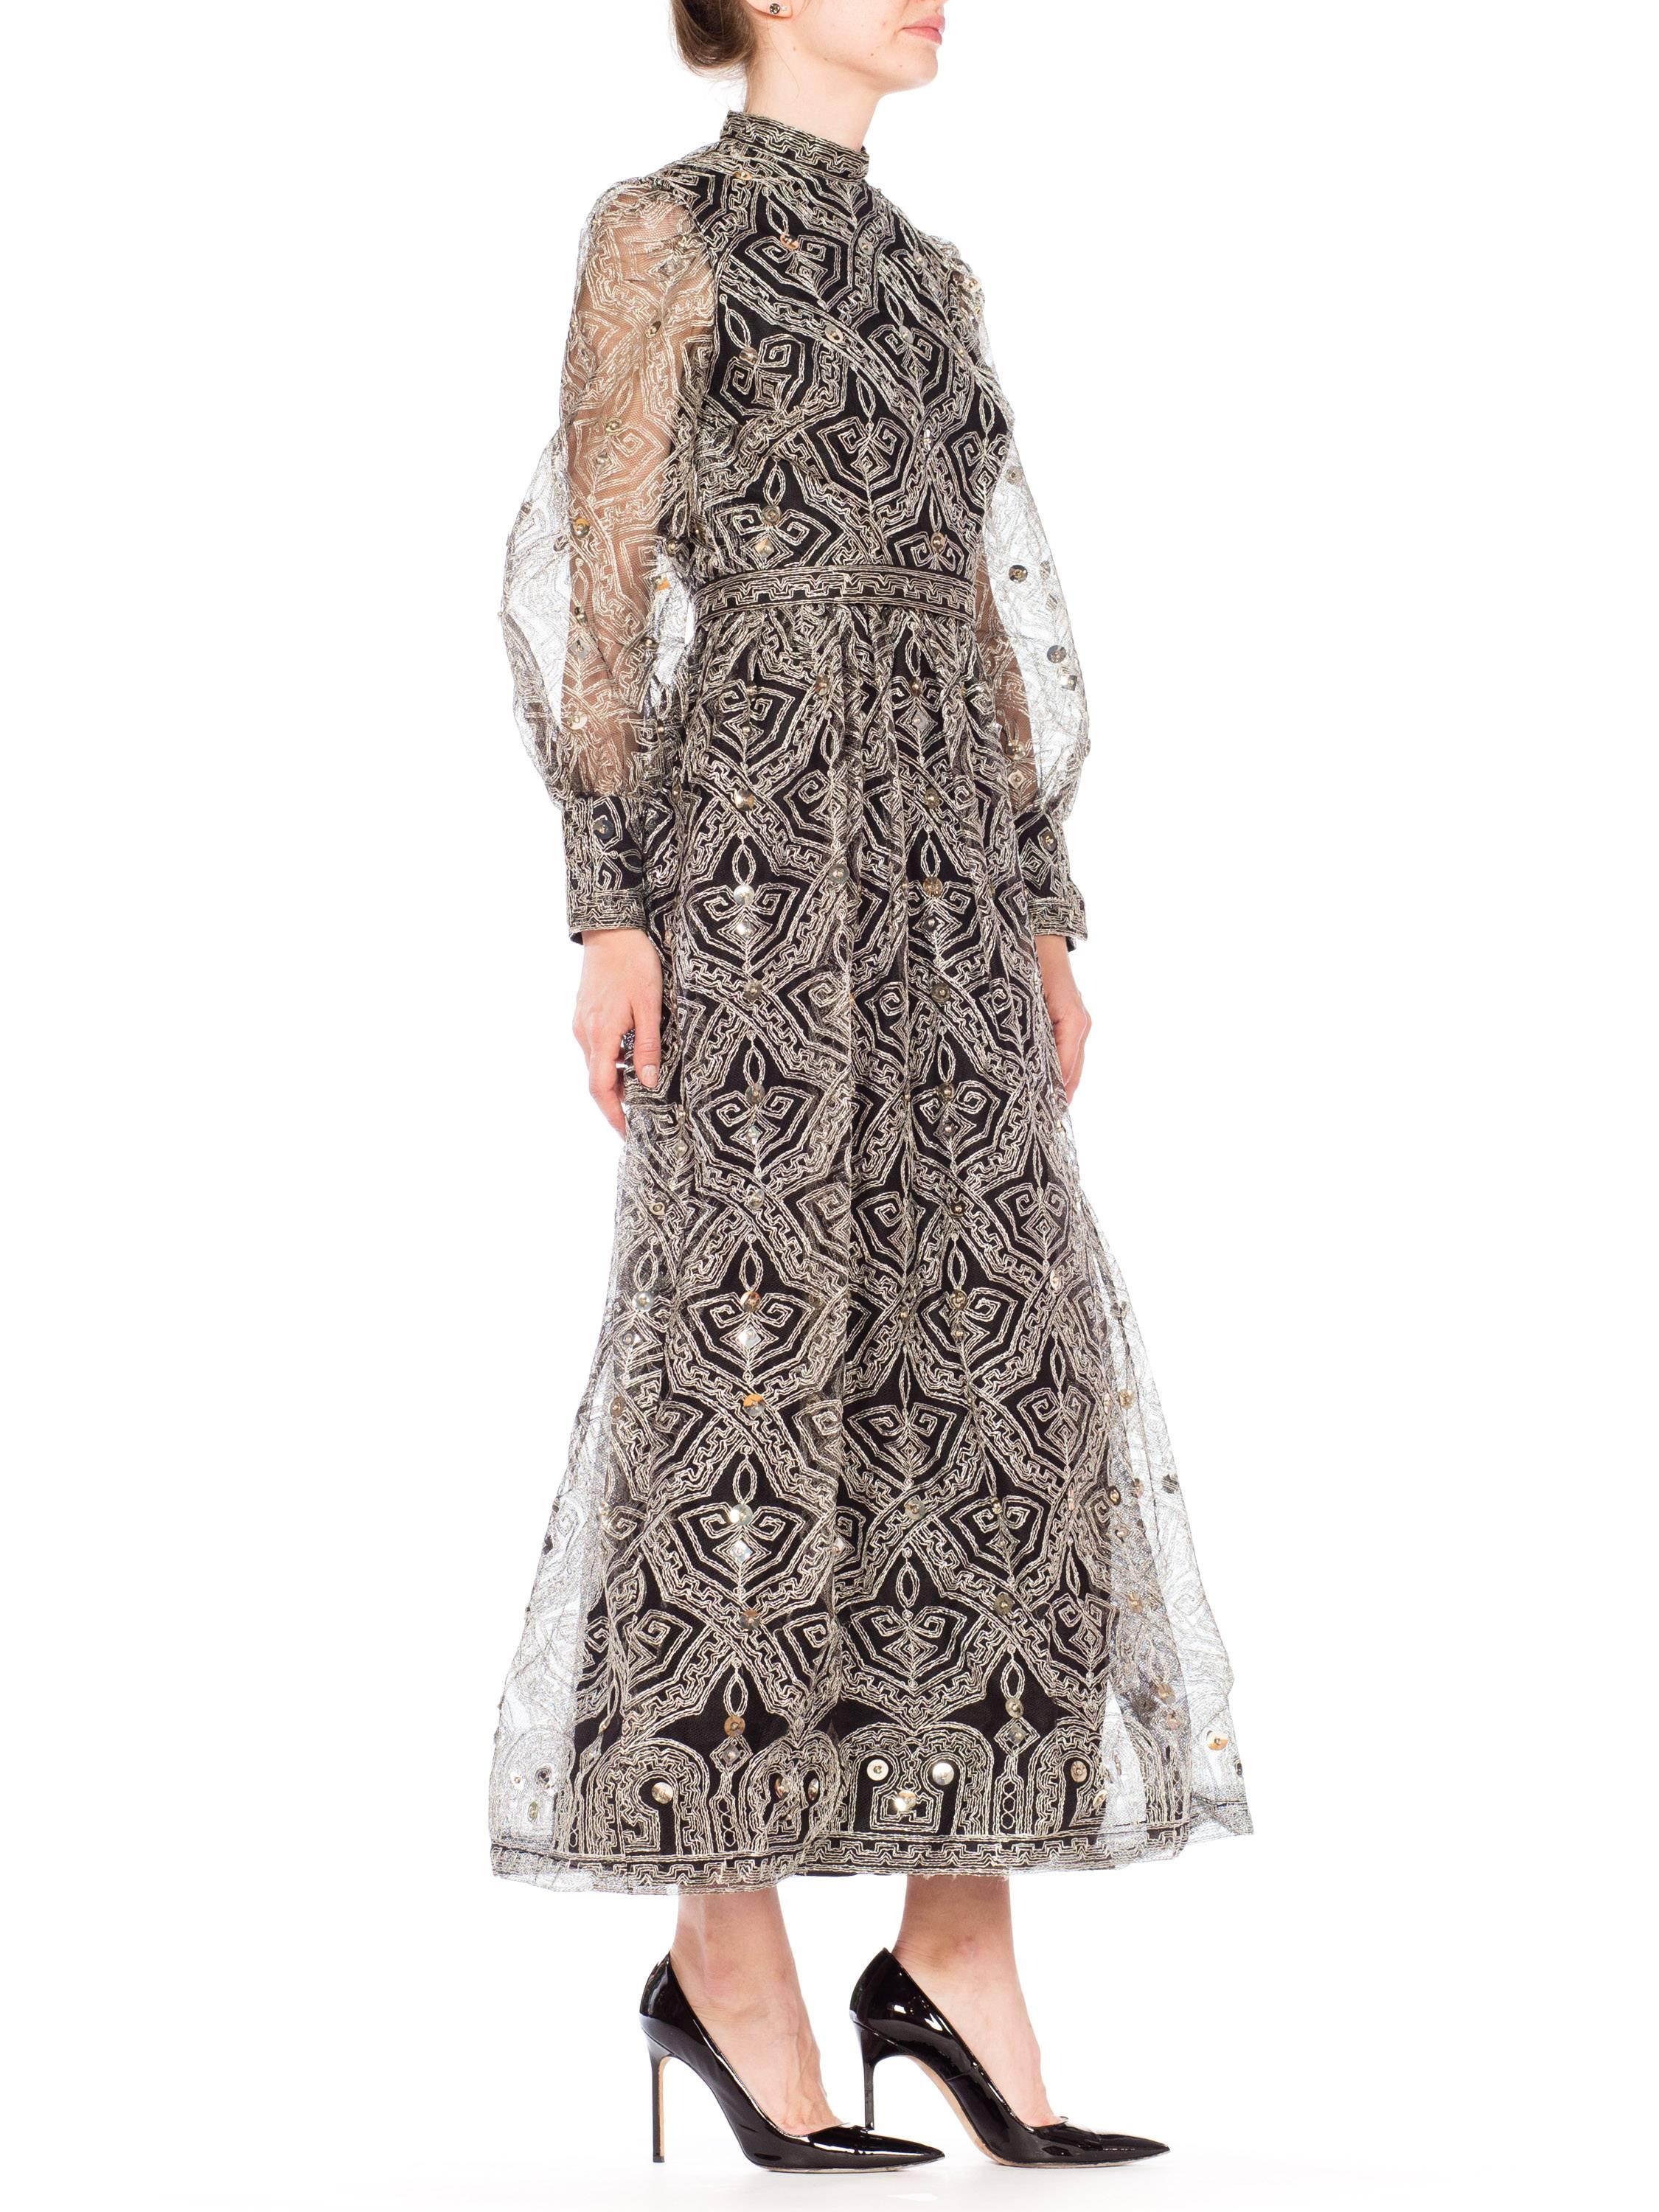 Gray Mollie Parnis Metallic Lurex Embroidered Net with Studded Sequins,  1960s 1970s 